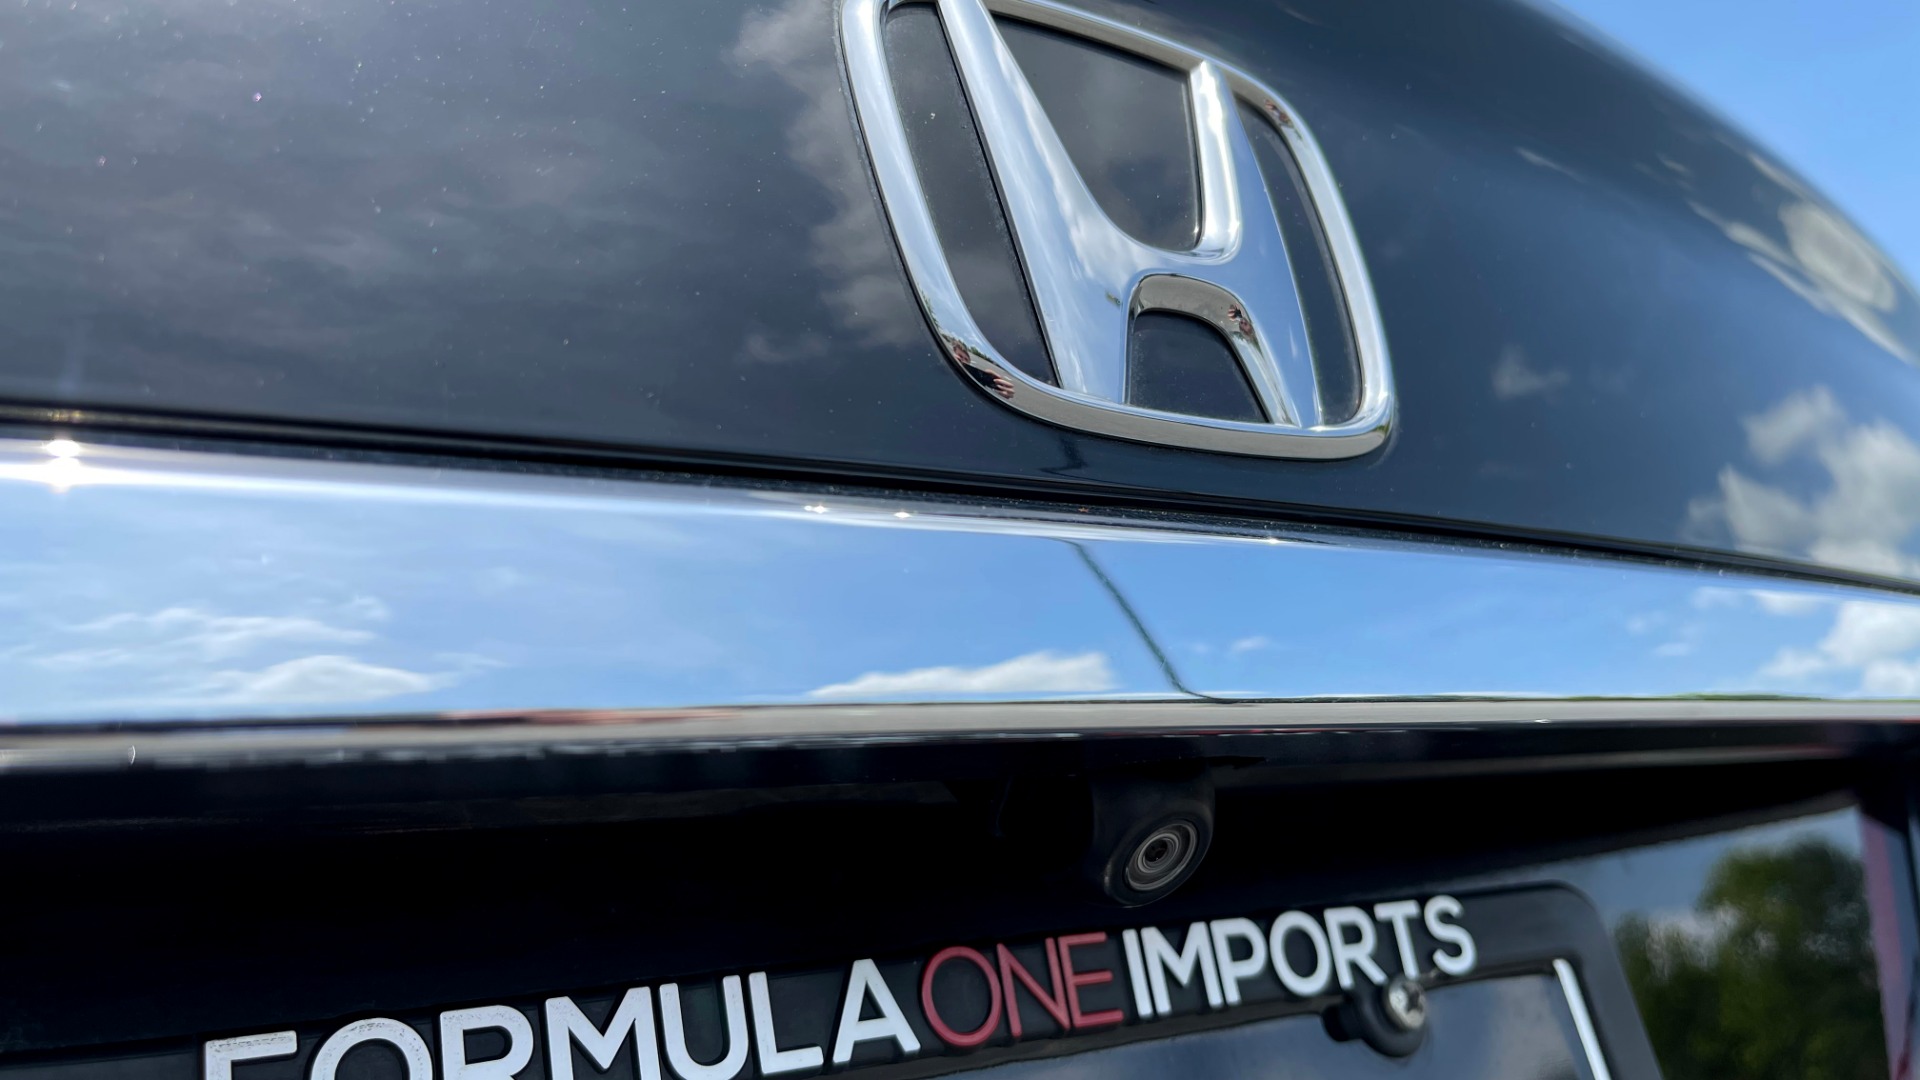 Used 2013 Honda CIVIC SEDAN LX / 5-SPD AUTO / 1.8L 4-CYL / BLUETOOTH / AIR CONDITIONING for sale Sold at Formula Imports in Charlotte NC 28227 32